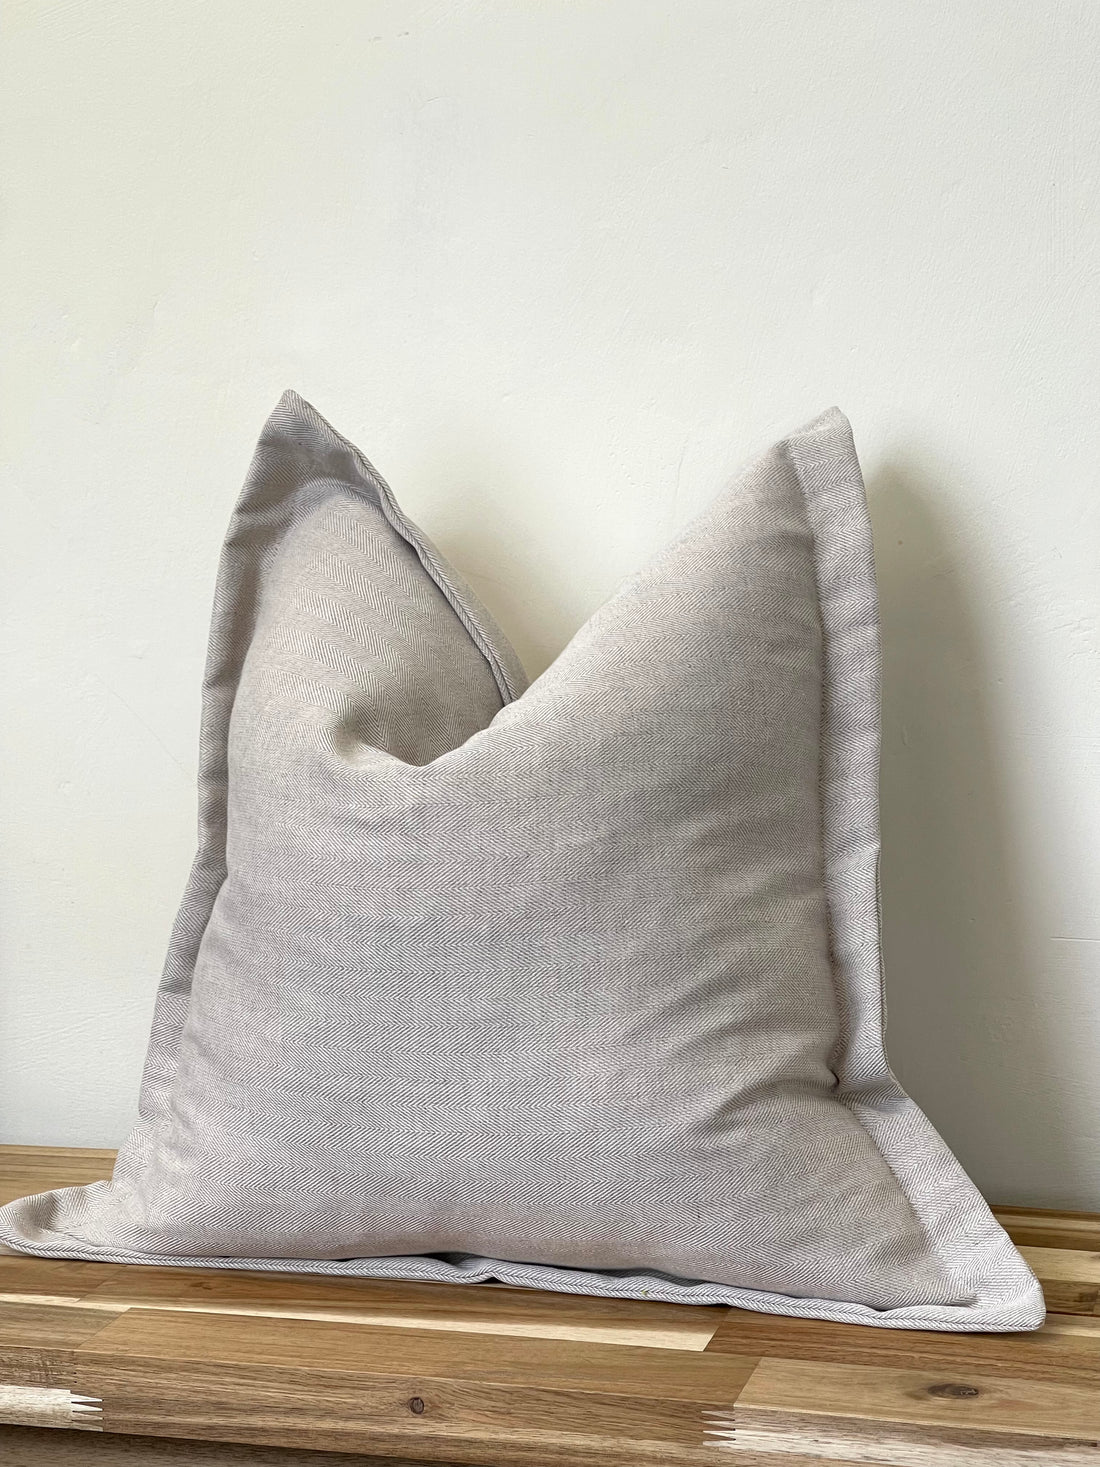 Luxury linen blend cushion in a neutral color, designed to complement and enhance a neutral aesthetic in home decor.